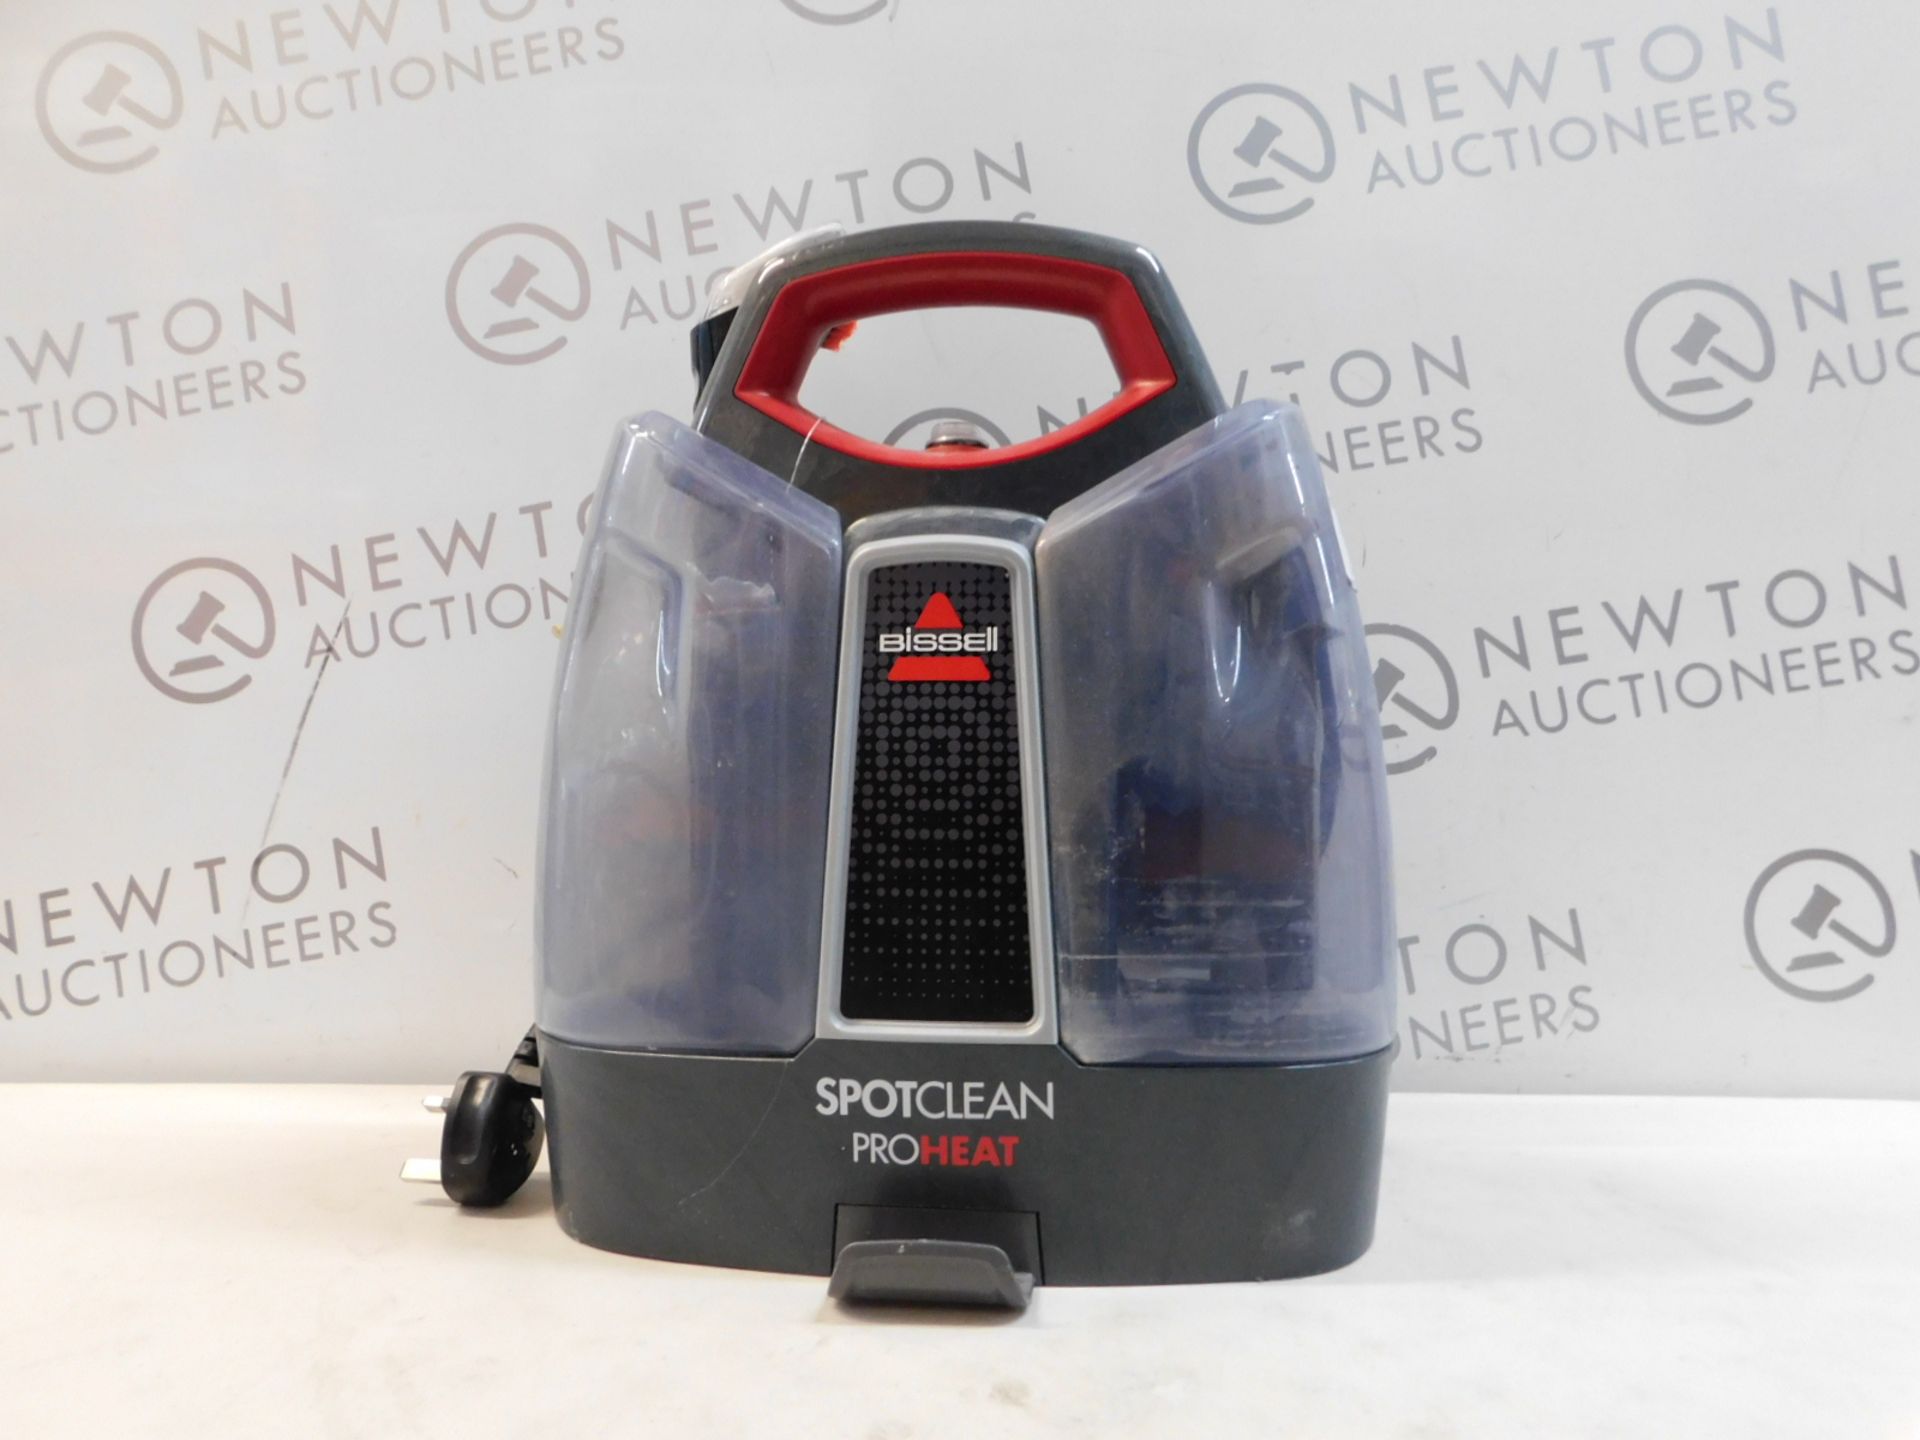 1 BISSELL SPOTCLEAN PROHEAT PORTABLE SPOT AND STAIN CARPET CLEANER RRP Â£199 (POWERS ON)